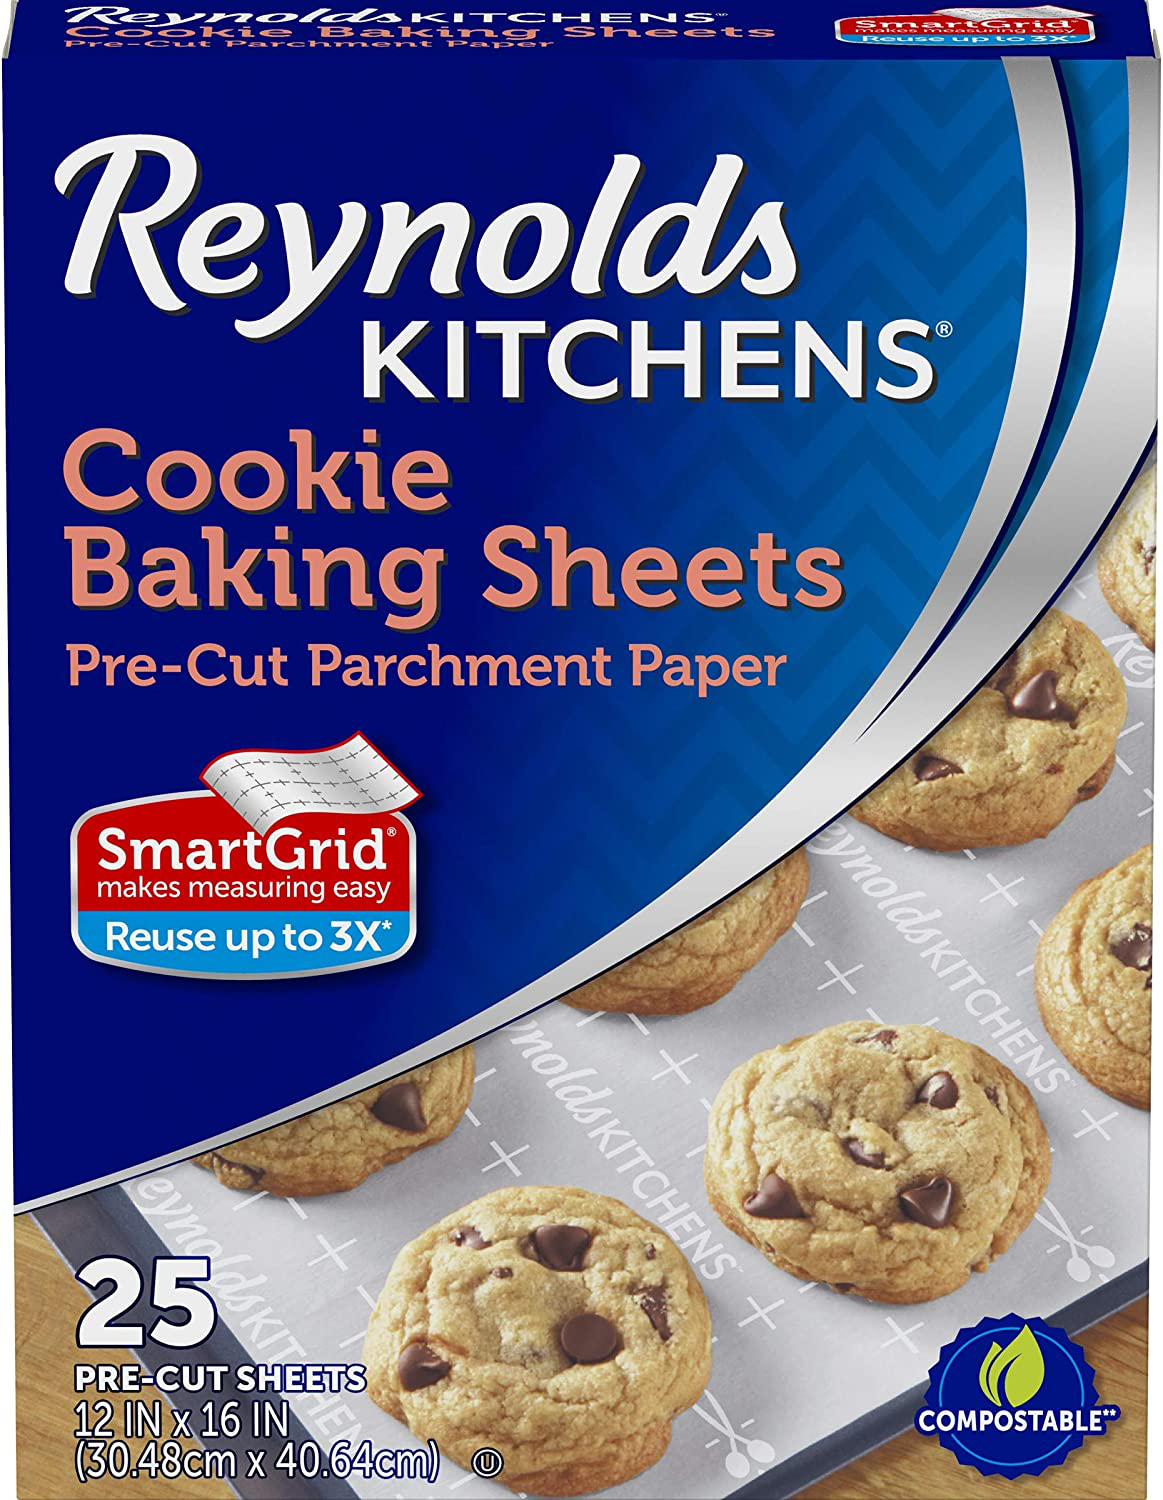 Reynolds Kitchens Cookie Baking Sheets, Pre-Cut Parchment Paper, 25 Sheets (Pack of 4), 100 Total Sheets